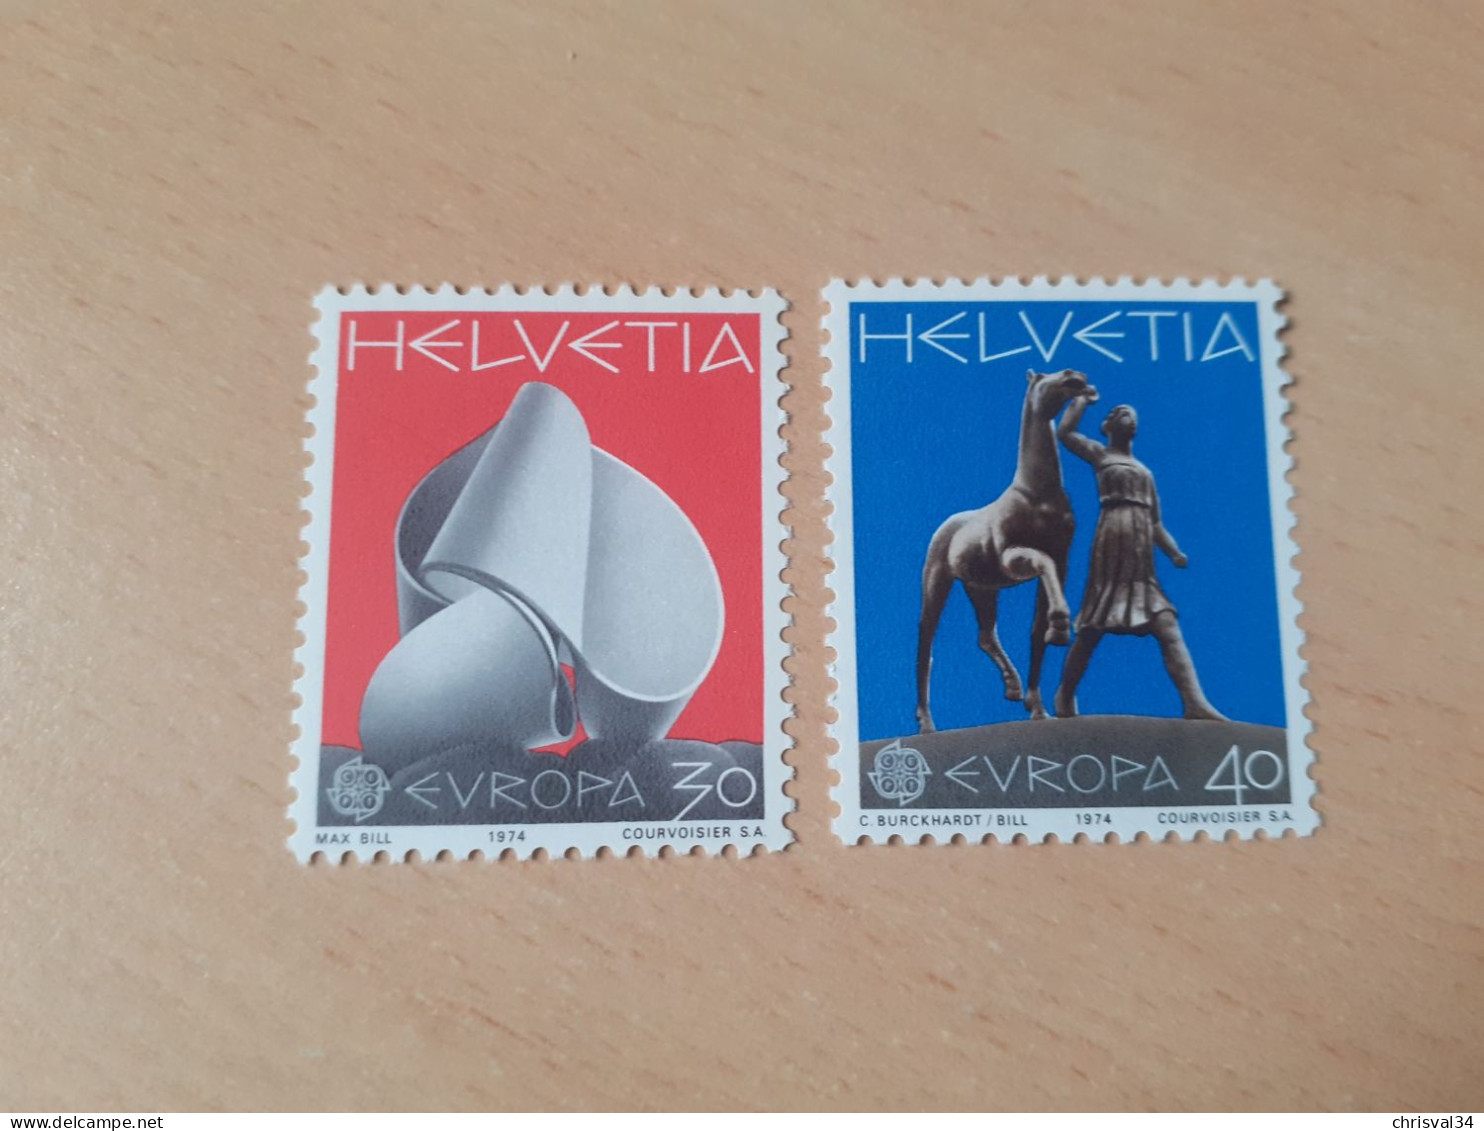 TIMBRES   SUISSE   ANNEE   1974   N  954  /  955   COTE  1,70  EUROS   NEUFS  LUXE** - Nuovi